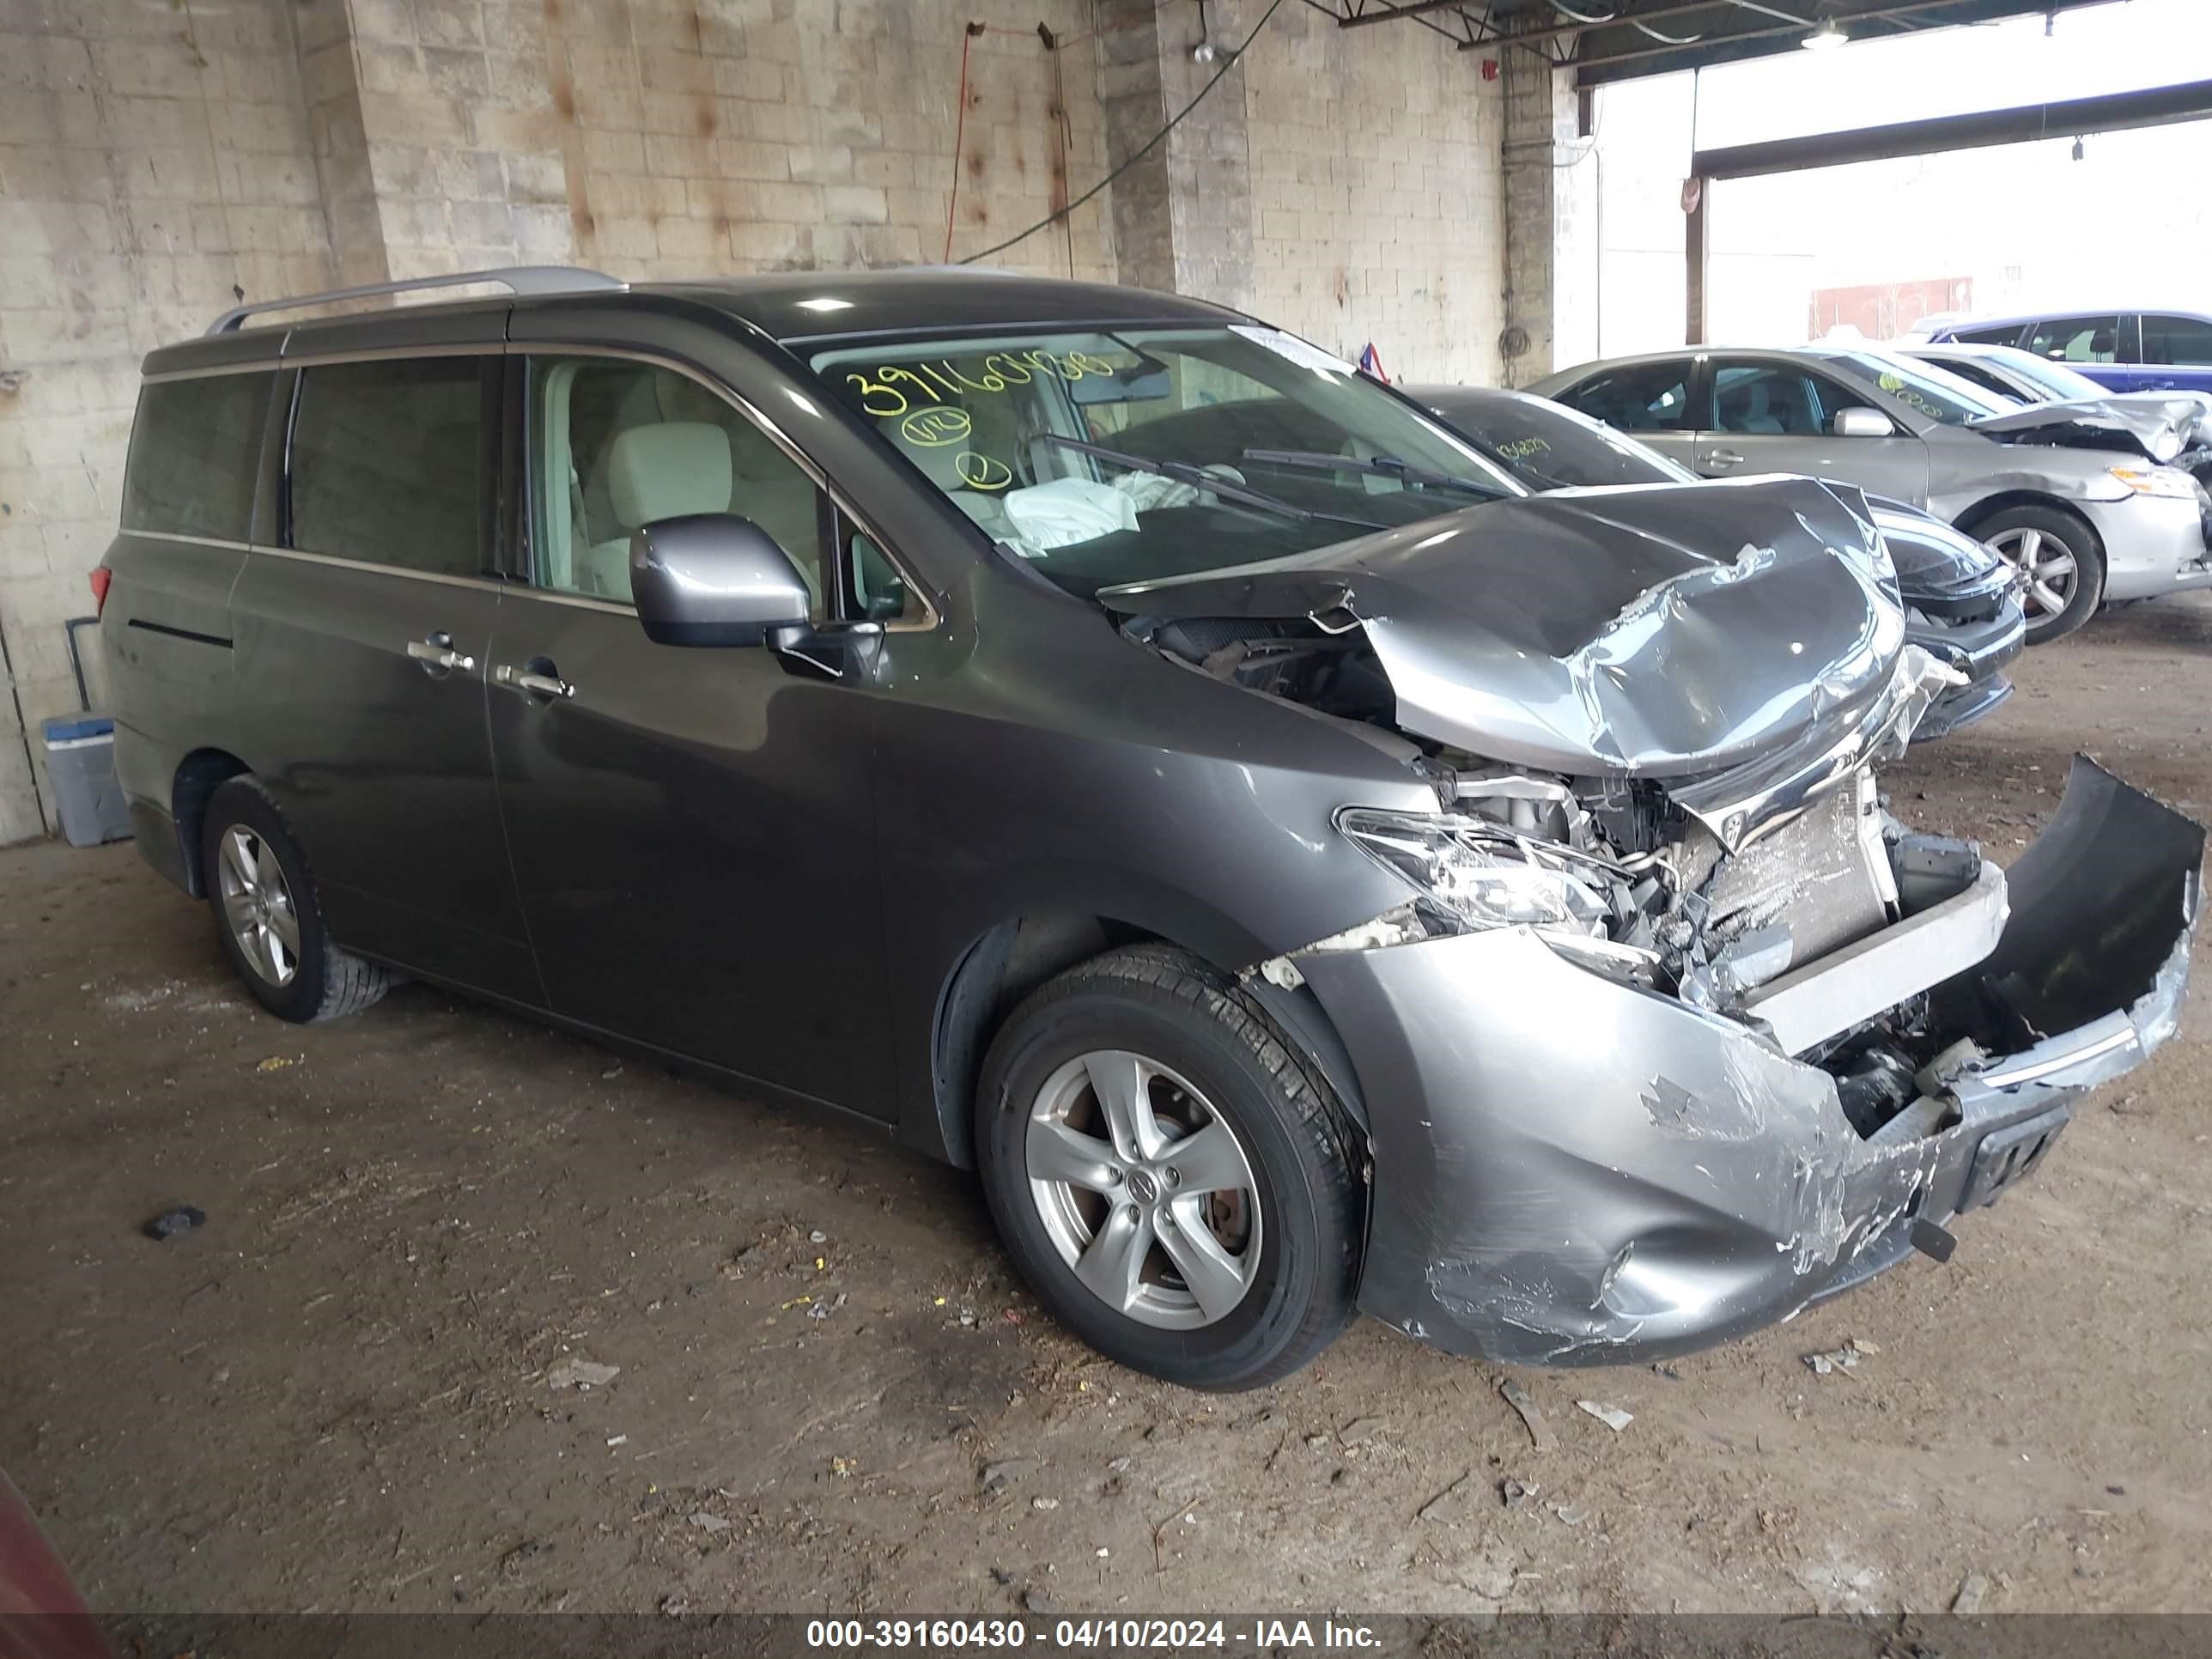 vin: JN8AE2KP4H9169302 JN8AE2KP4H9169302 2017 nissan quest 3500 for Sale in 11763, 171 Peconic Ave, Medford, New York, USA